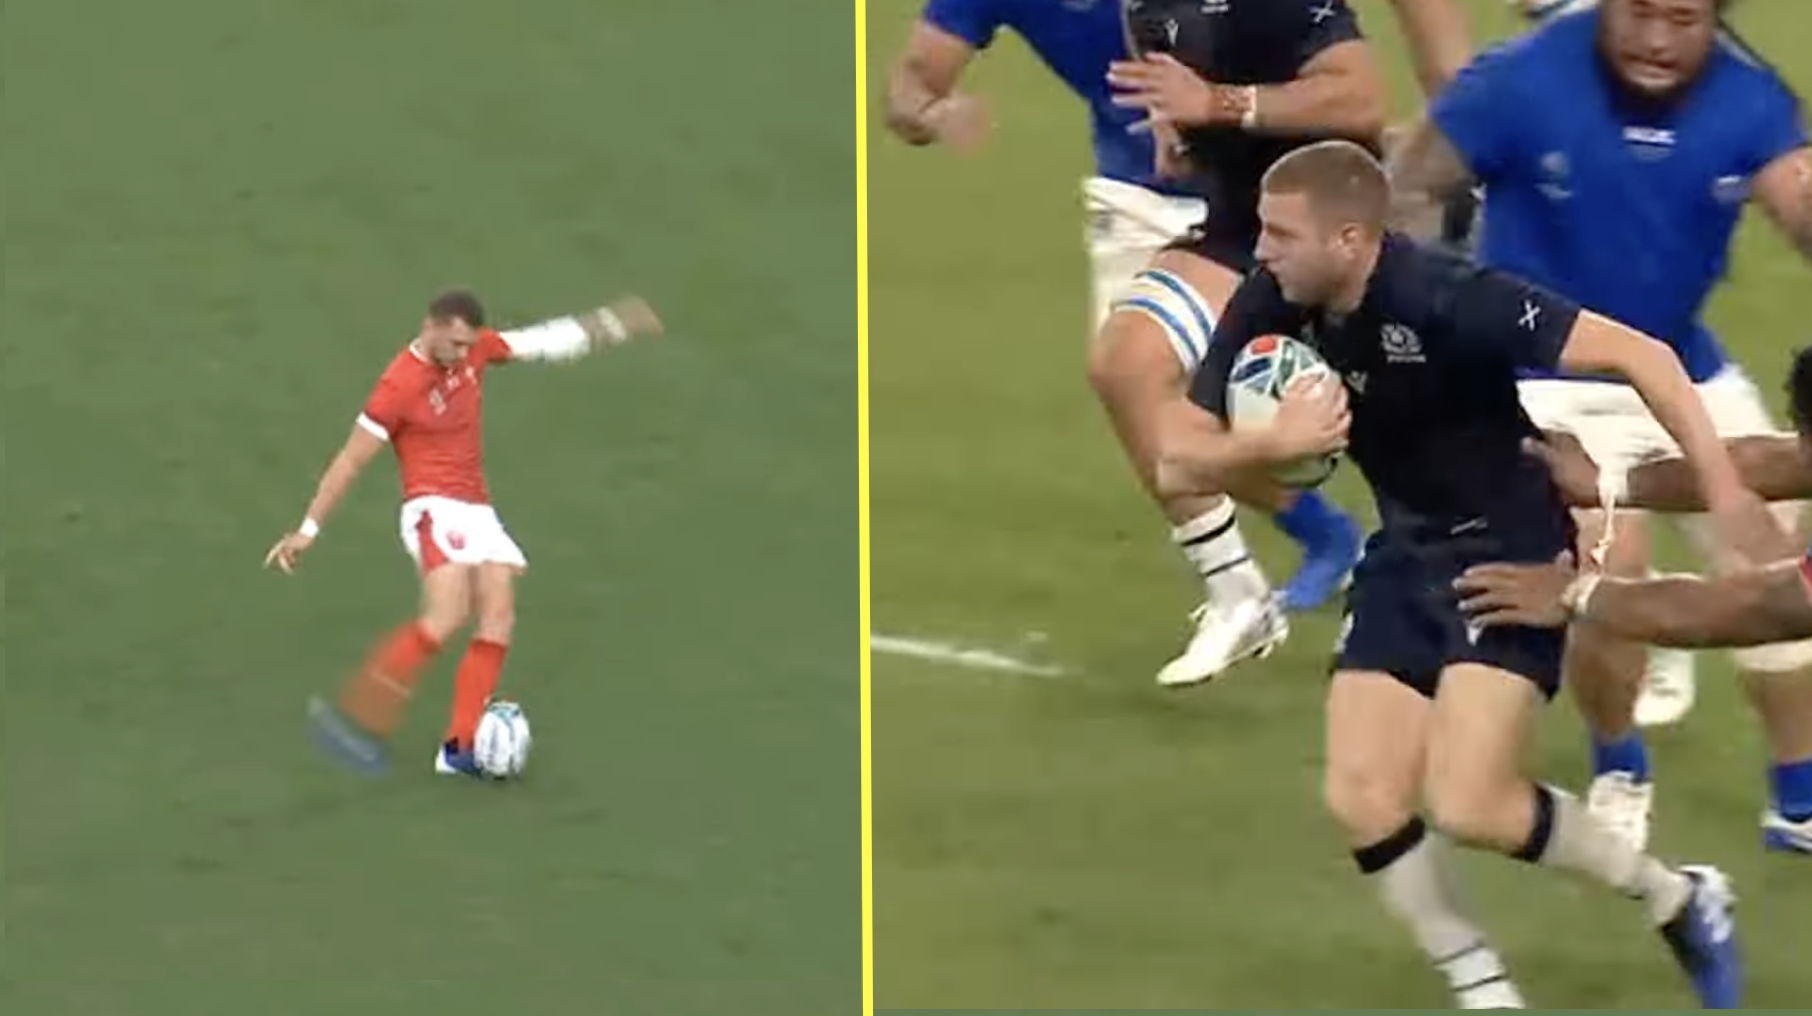 Why Biggar vs Russell is the ultimate clash of styles